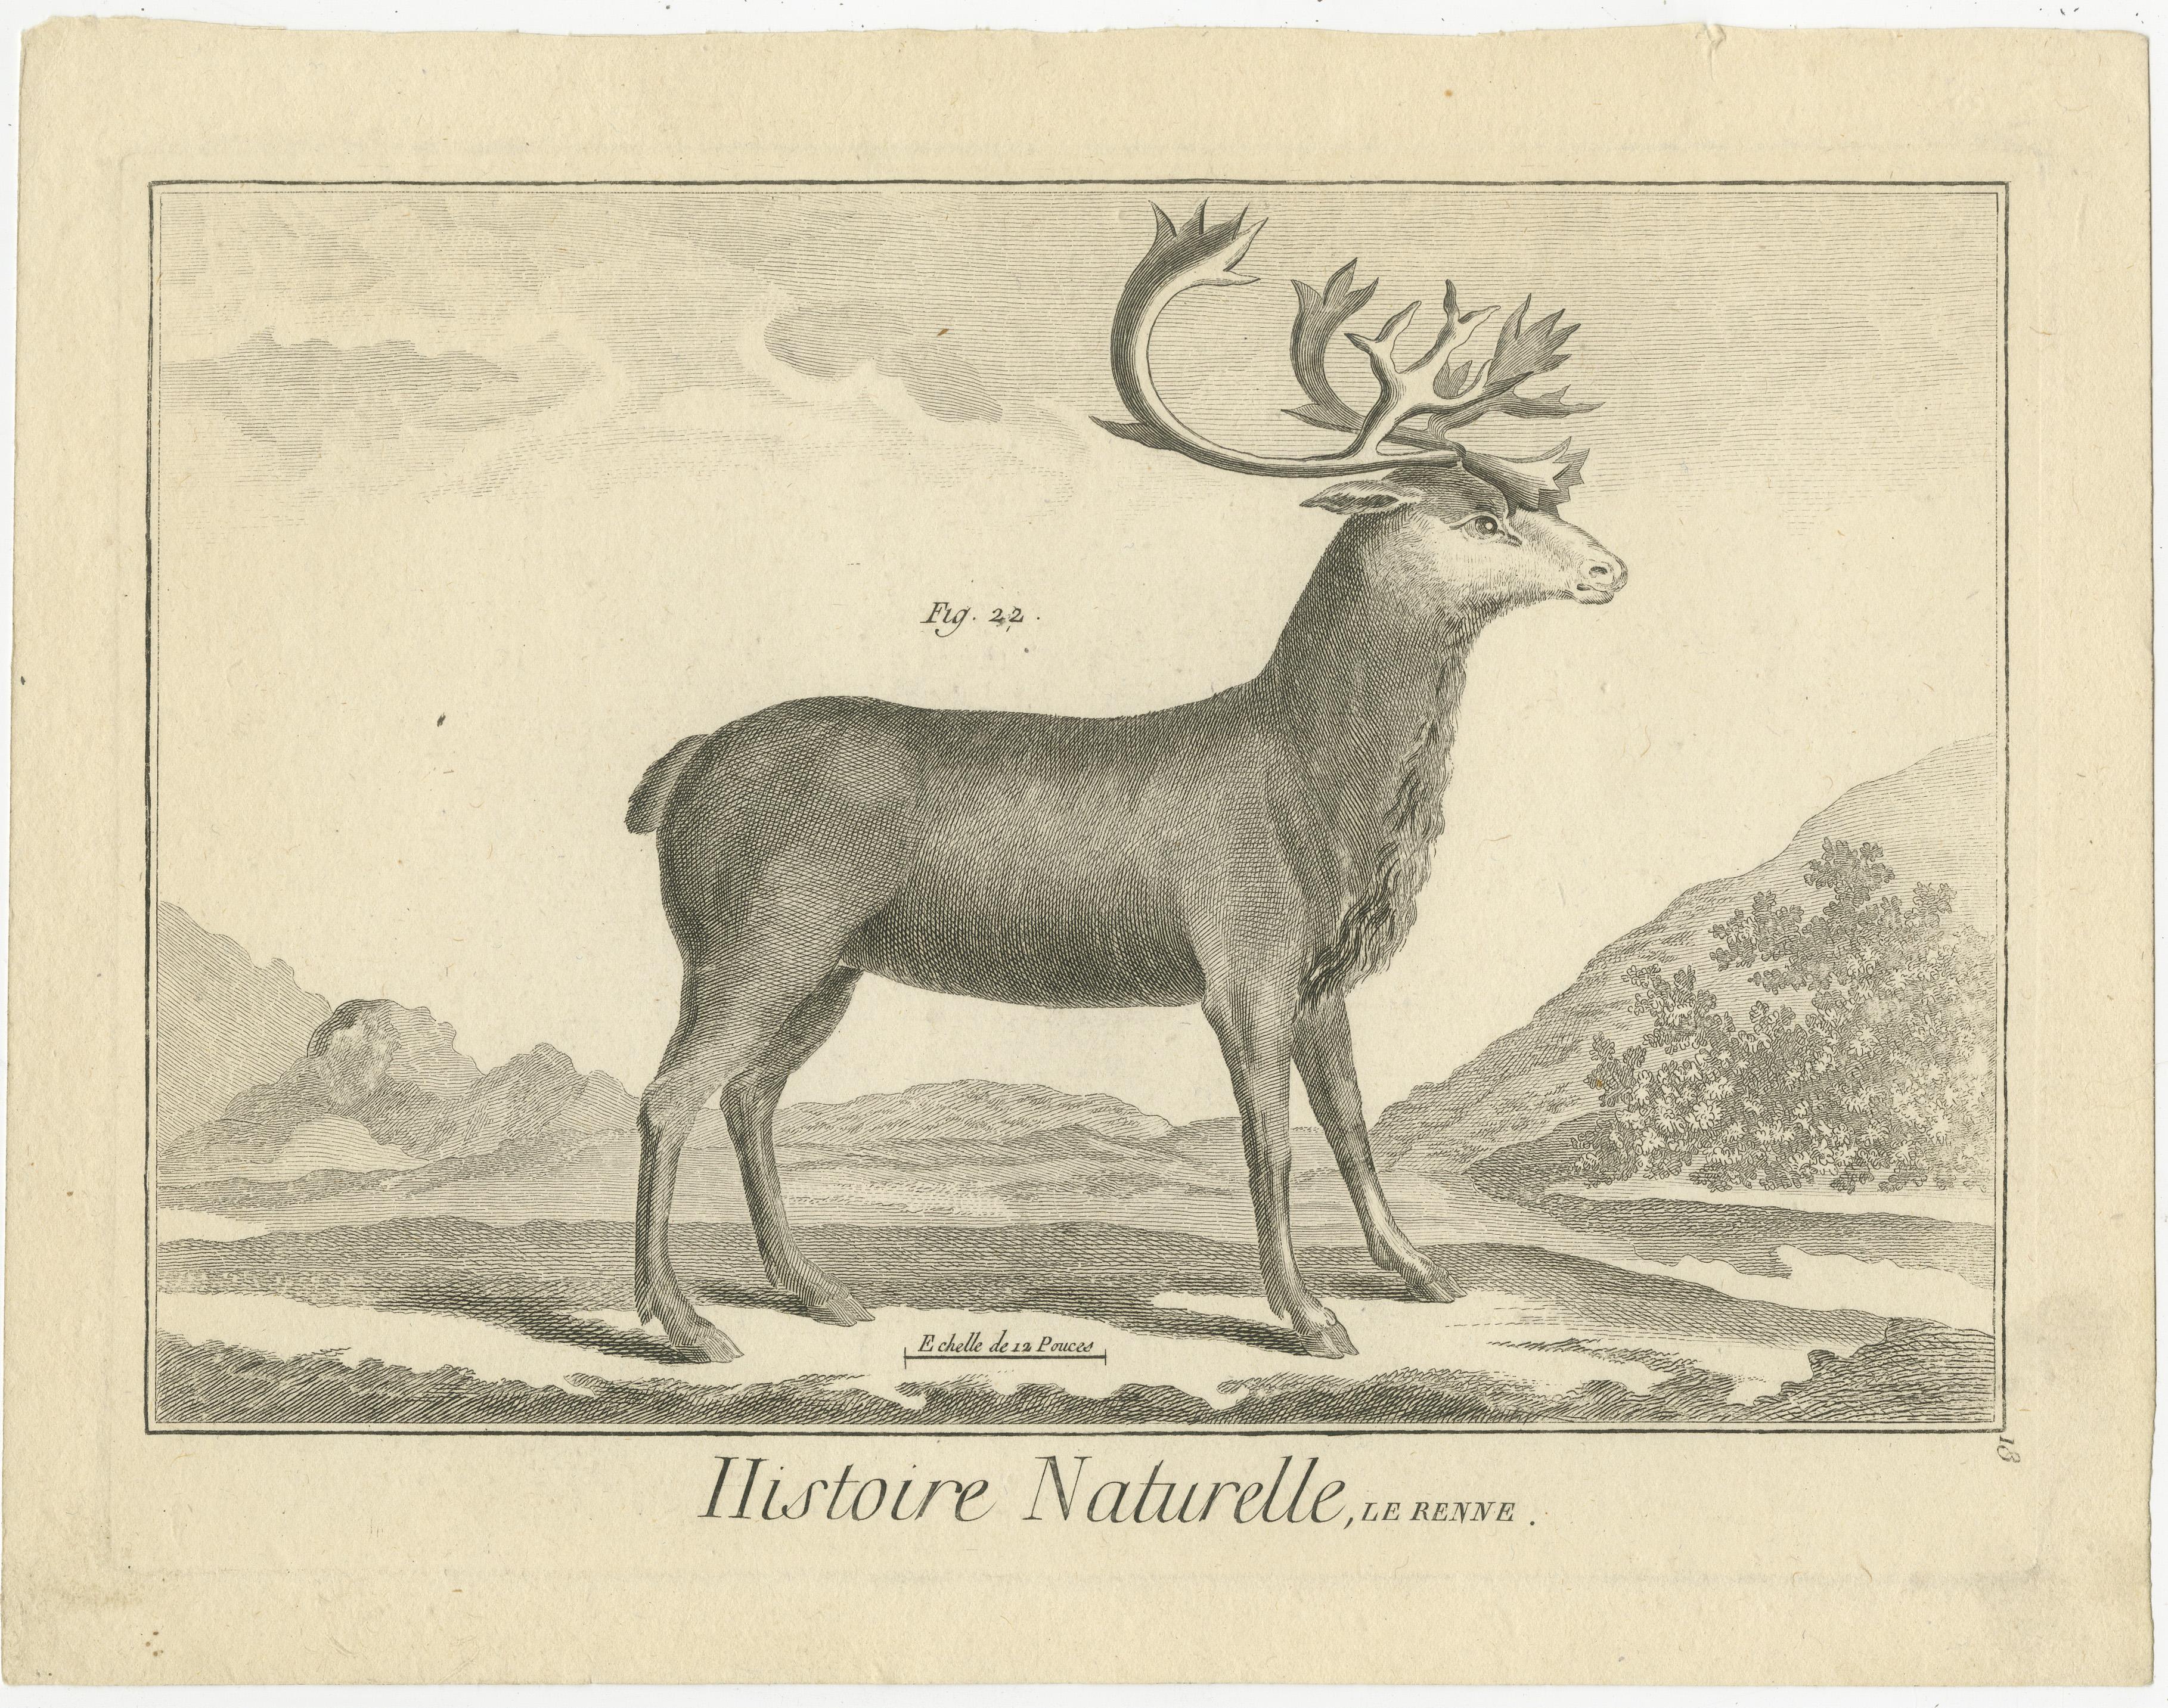 Original antique print titled 'Histoire Naturelle, Le Renne'. Engraving of a deer. Source unknown, to be determined. Published circa 1800.